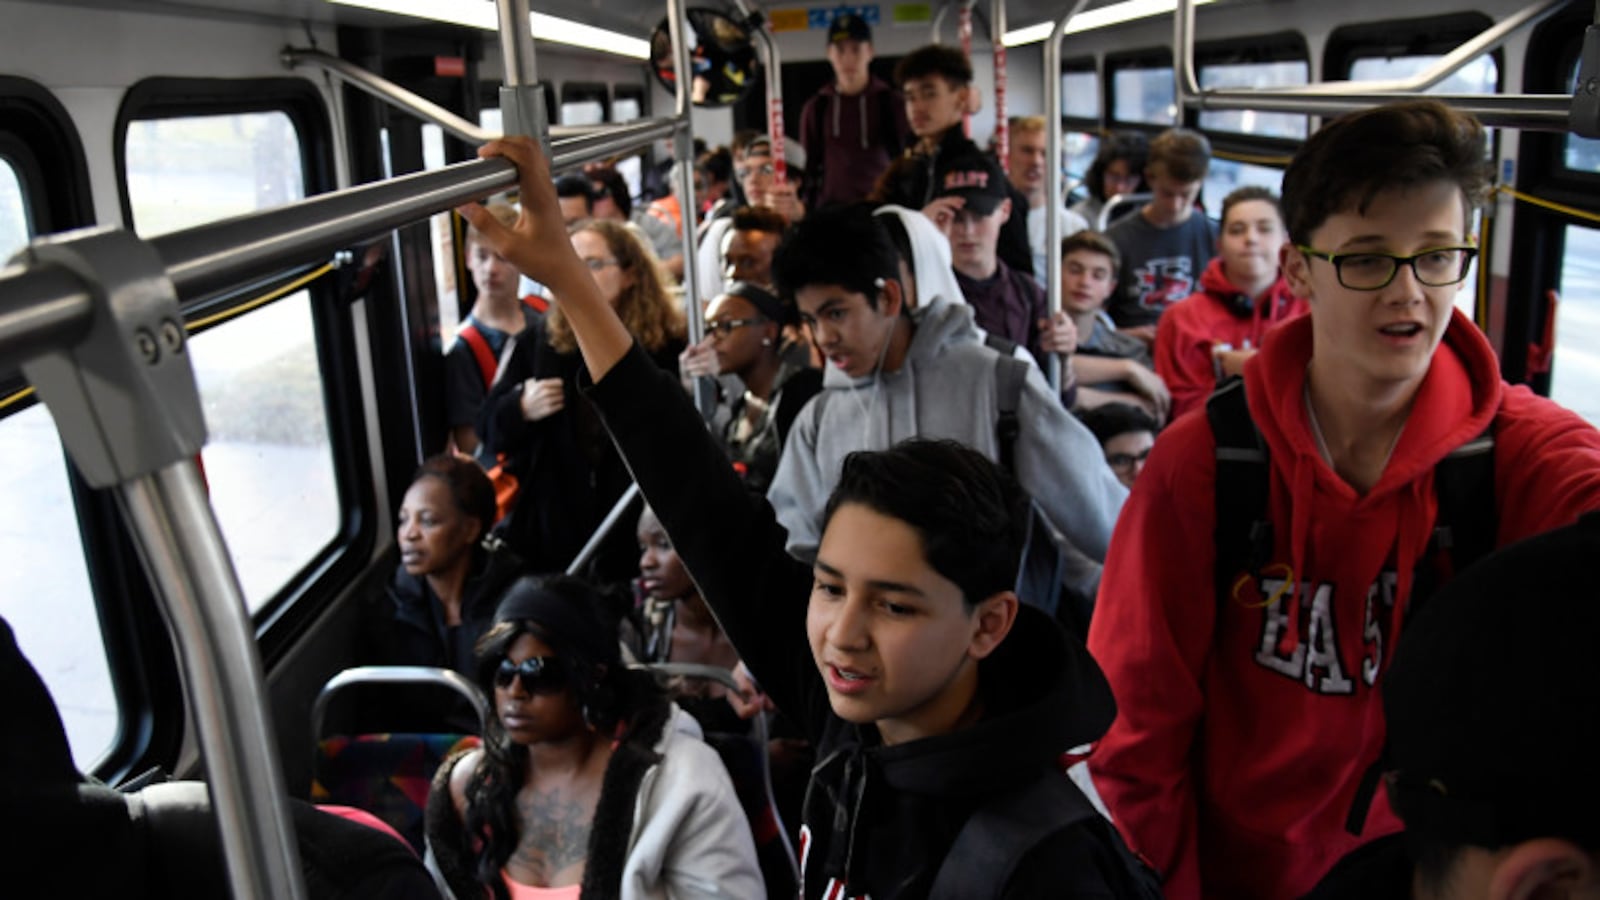 East High School freshman Marcos Chavez, center, hangs onto a handrail on an RTD bus on his way home from school in 2017.